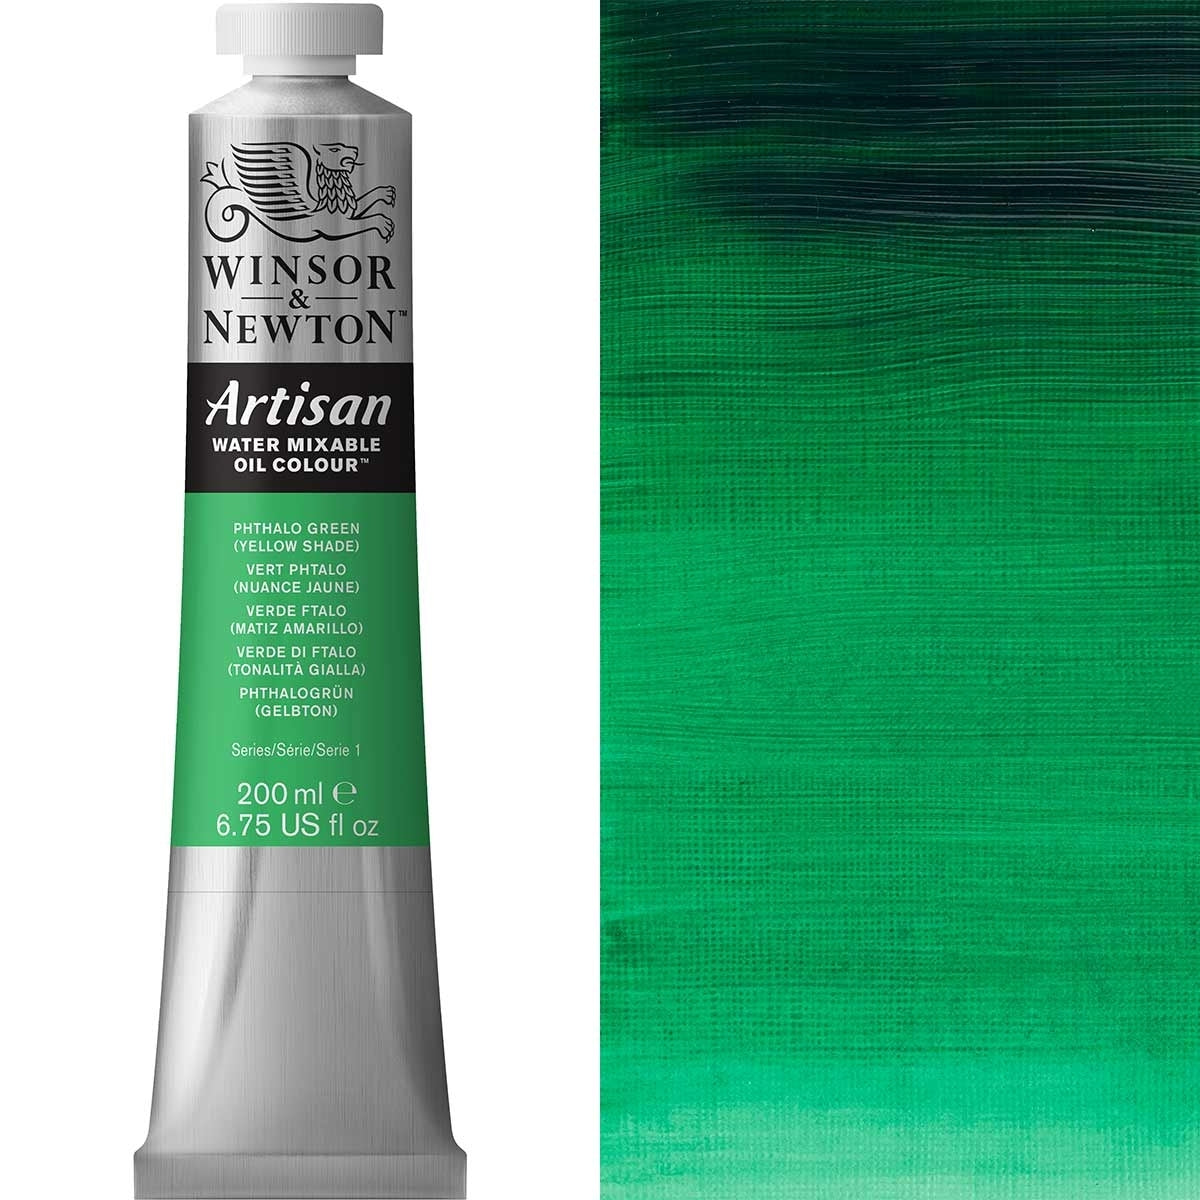 Winsor et Newton - Couleur d'huile artisanale Watermixable - 200 ml - Phthalo Green Yellow Shade